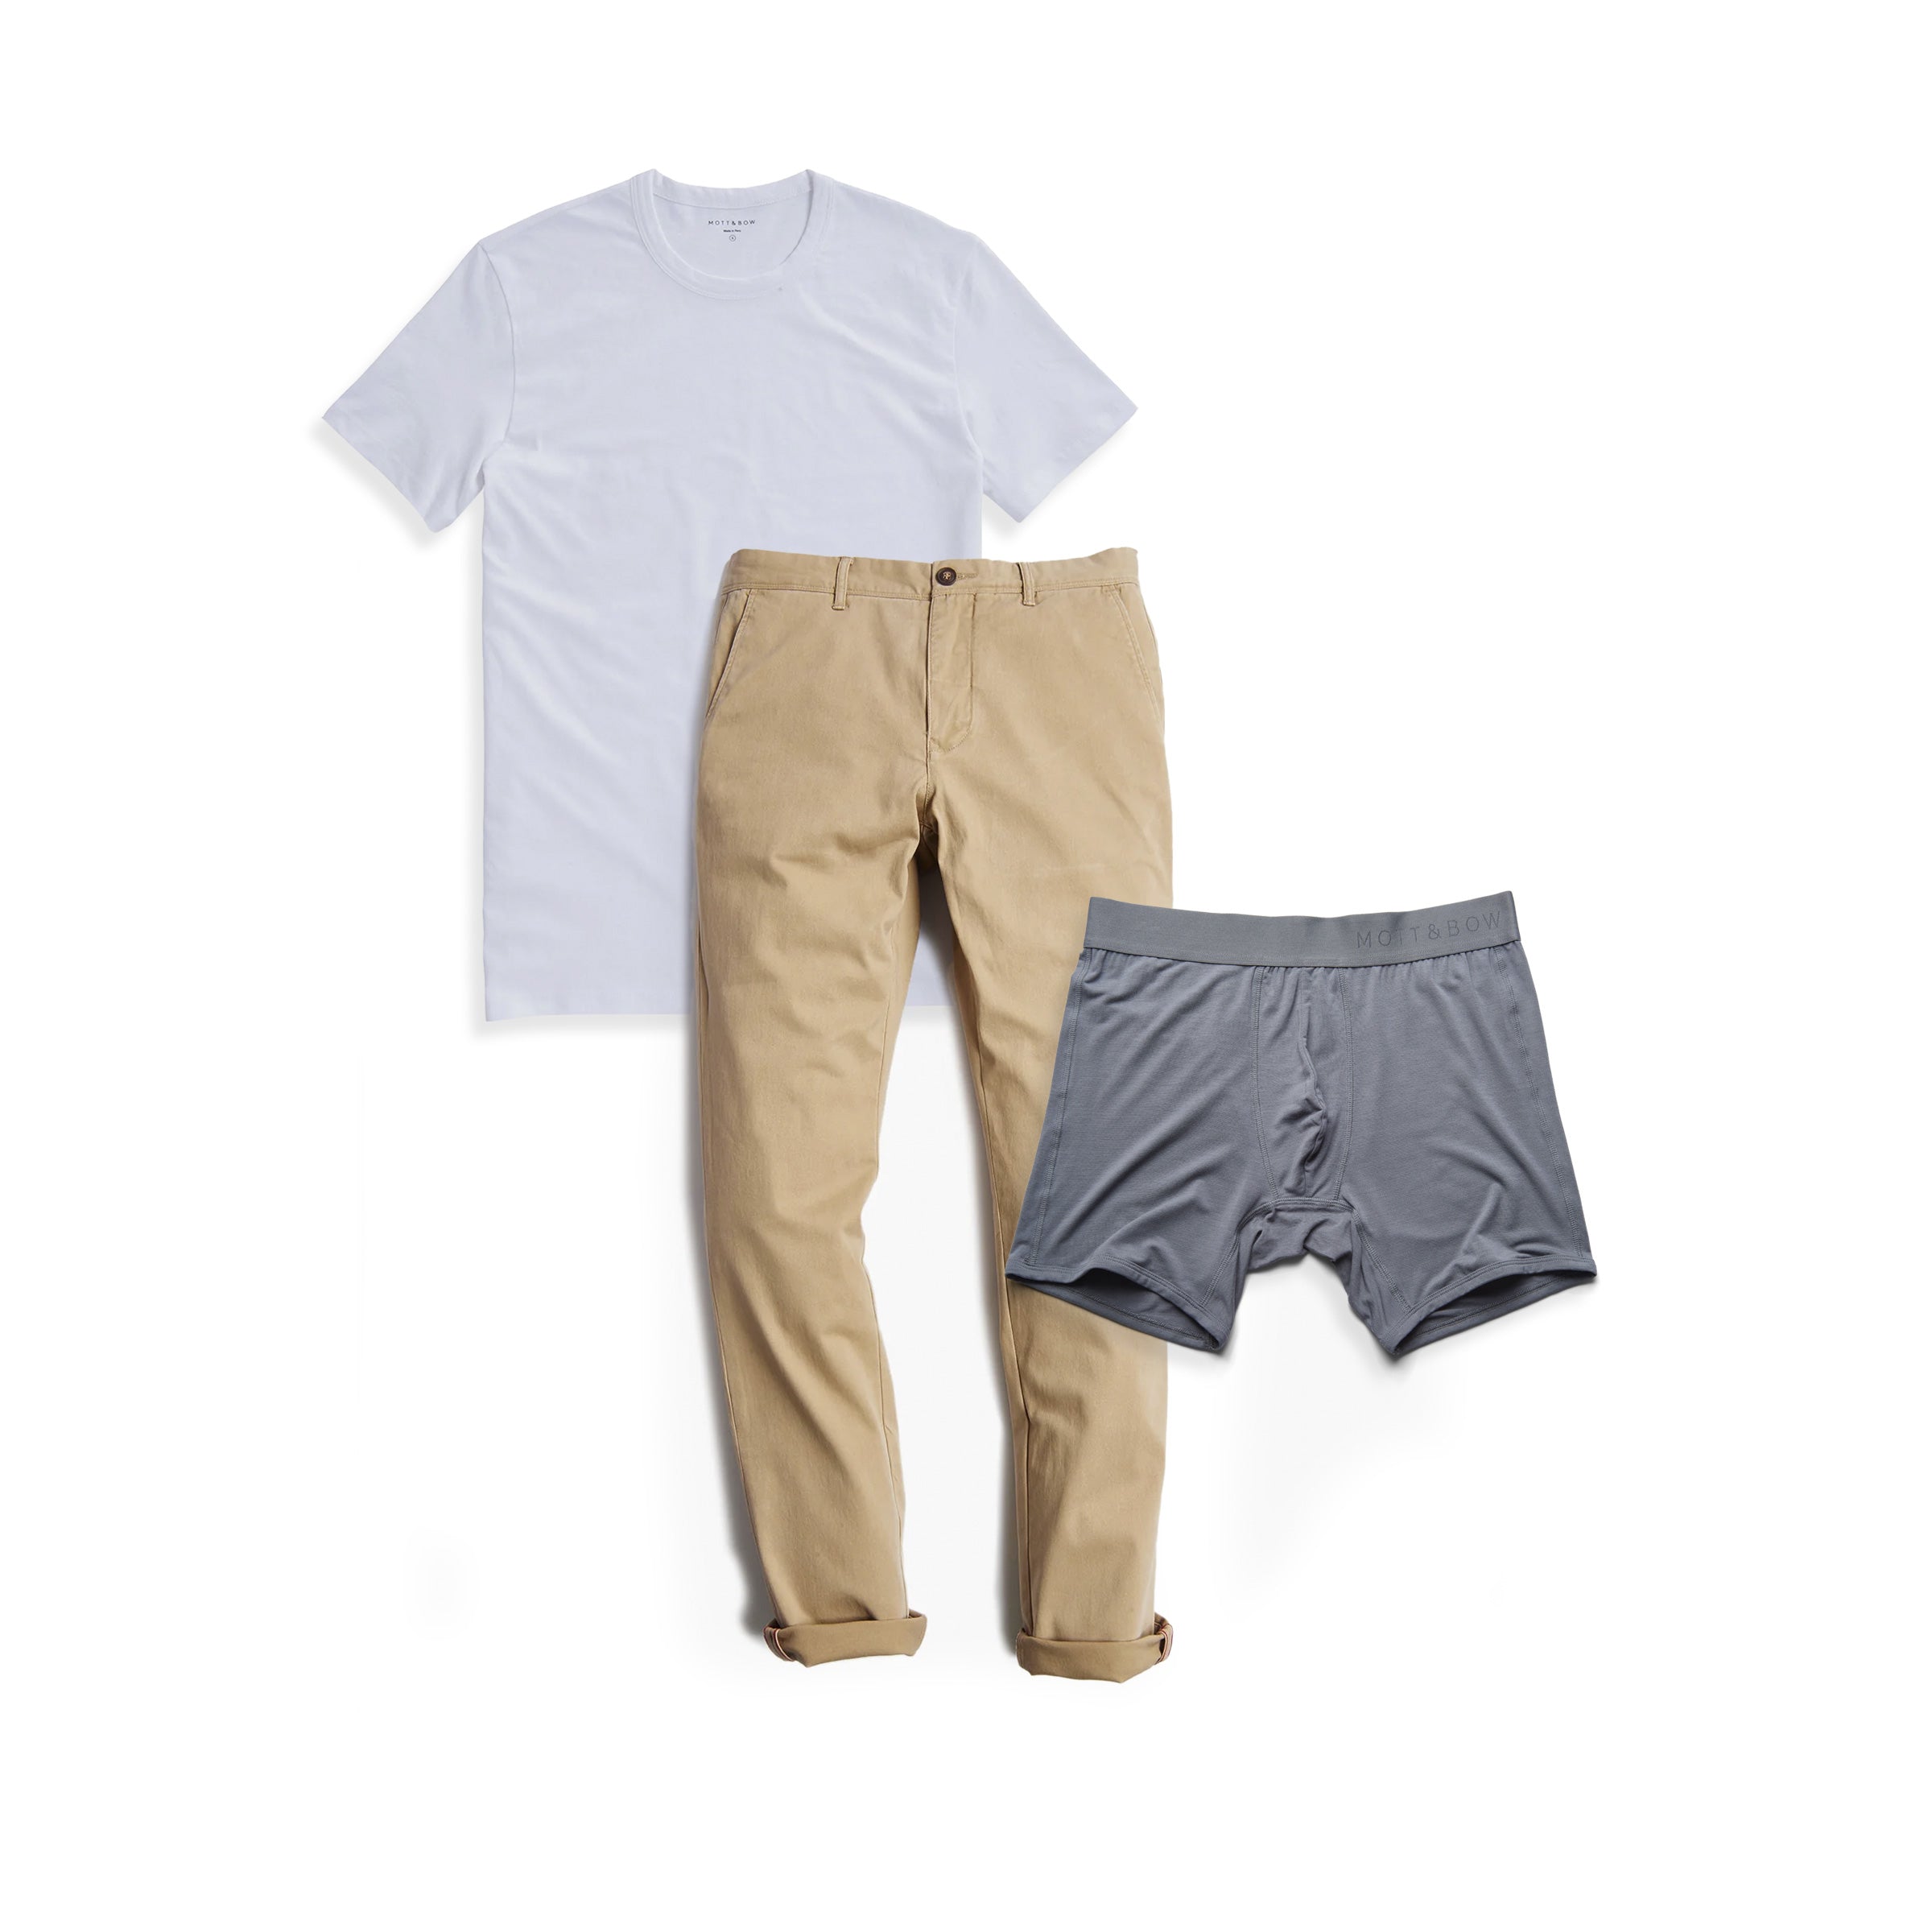  wearing Default Title Set 10: 1 pair of Chinos + 1 Driggs tee + 1 Boxer Brief